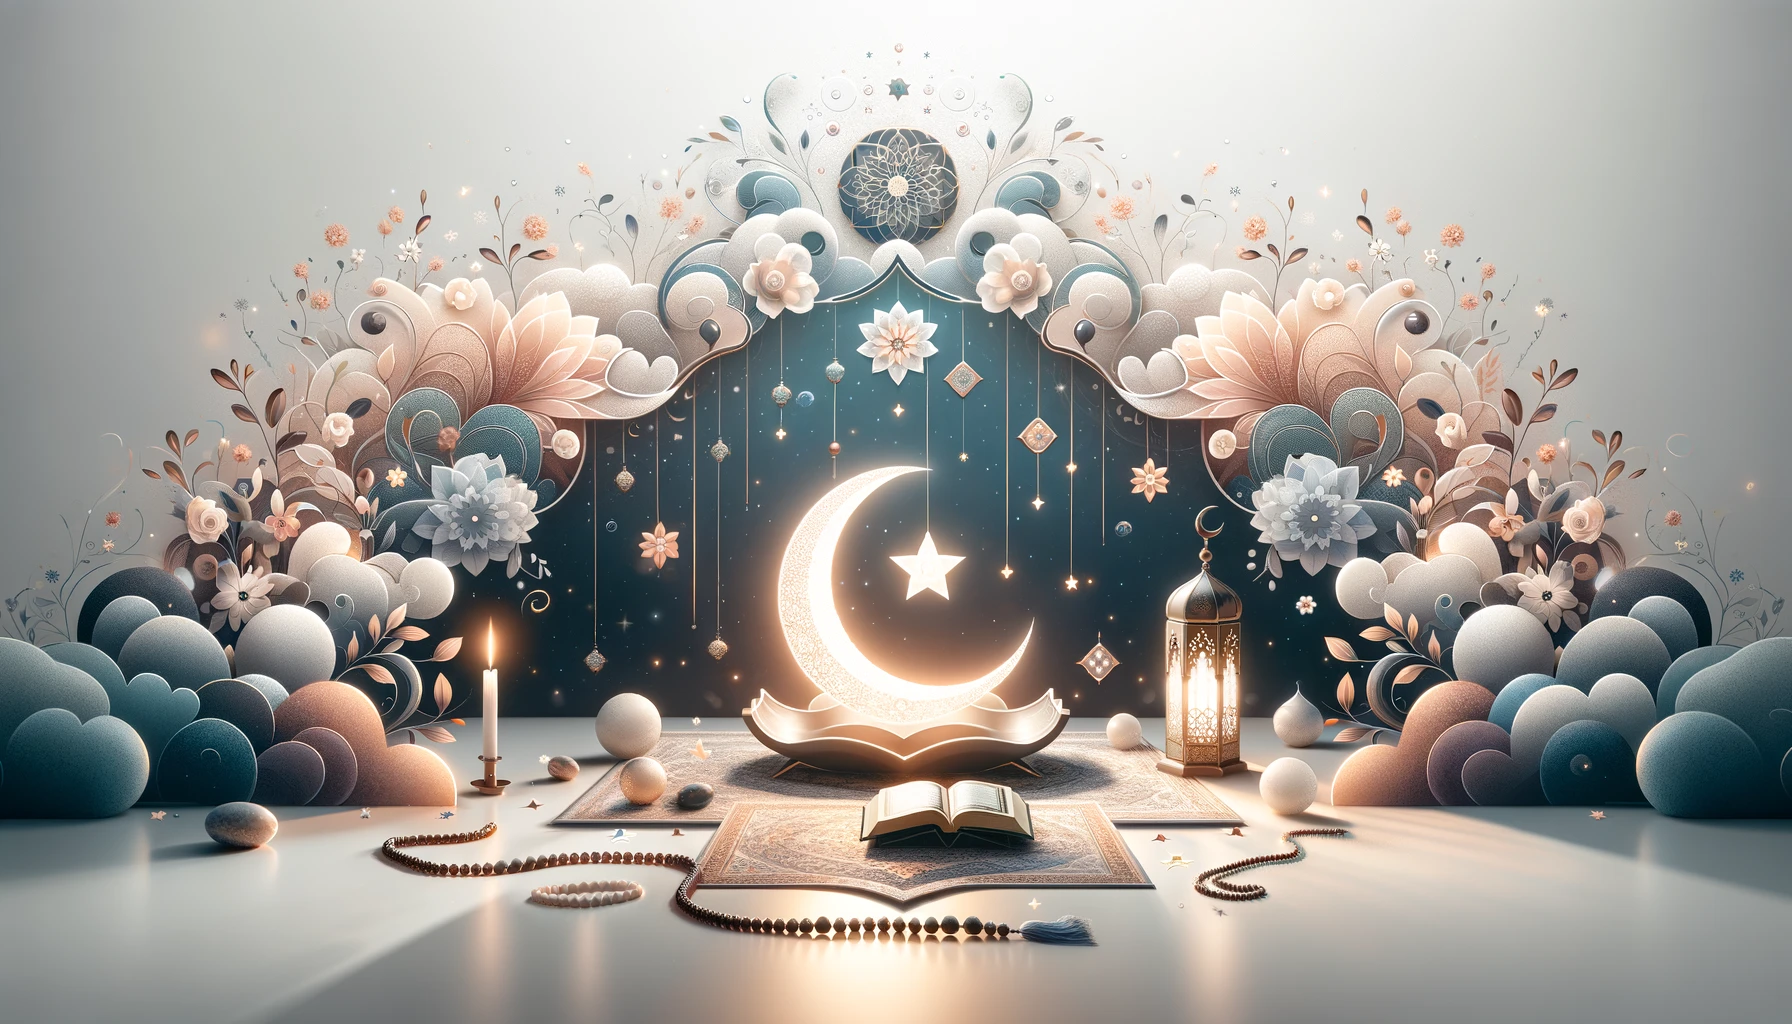 maximizing the benefits of Shaban, featuring Islamic spiritual symbols like crescent moons, stars, a Quran, and prayer beads against a tranquil background with floral and geometric Islamic art patterns.